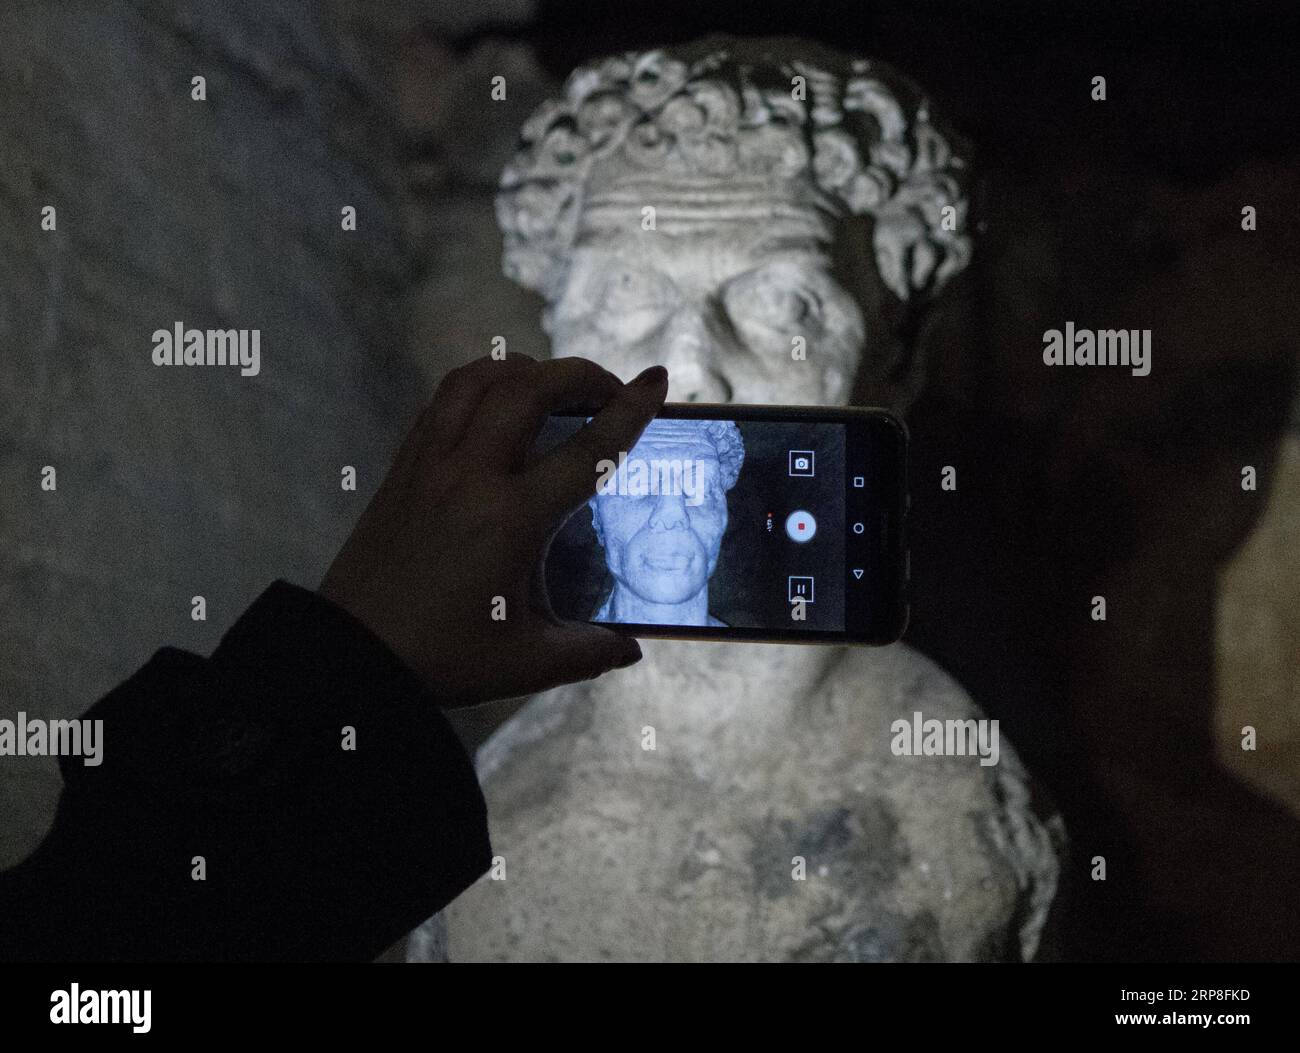 (190303) -- ALEXANDRIA (EGYPT), March 3, 2019 -- A man takes photos in ancient Kom al-Shoqafa tombs in the northern seaside Alexandria province, Egypt, on March 3, 2019. The Egyptian Ministry of Antiquities celebrated on Sunday the completion of a project removing underground water from 2,000-year-old catacombs in the northern seaside province of Alexandria dating back to the Greco-Roman era. ) EGYPT-ALEXANDRIA-GRECO-ROMAN CATACOMBS WuxHuiwo PUBLICATIONxNOTxINxCHN Stock Photo